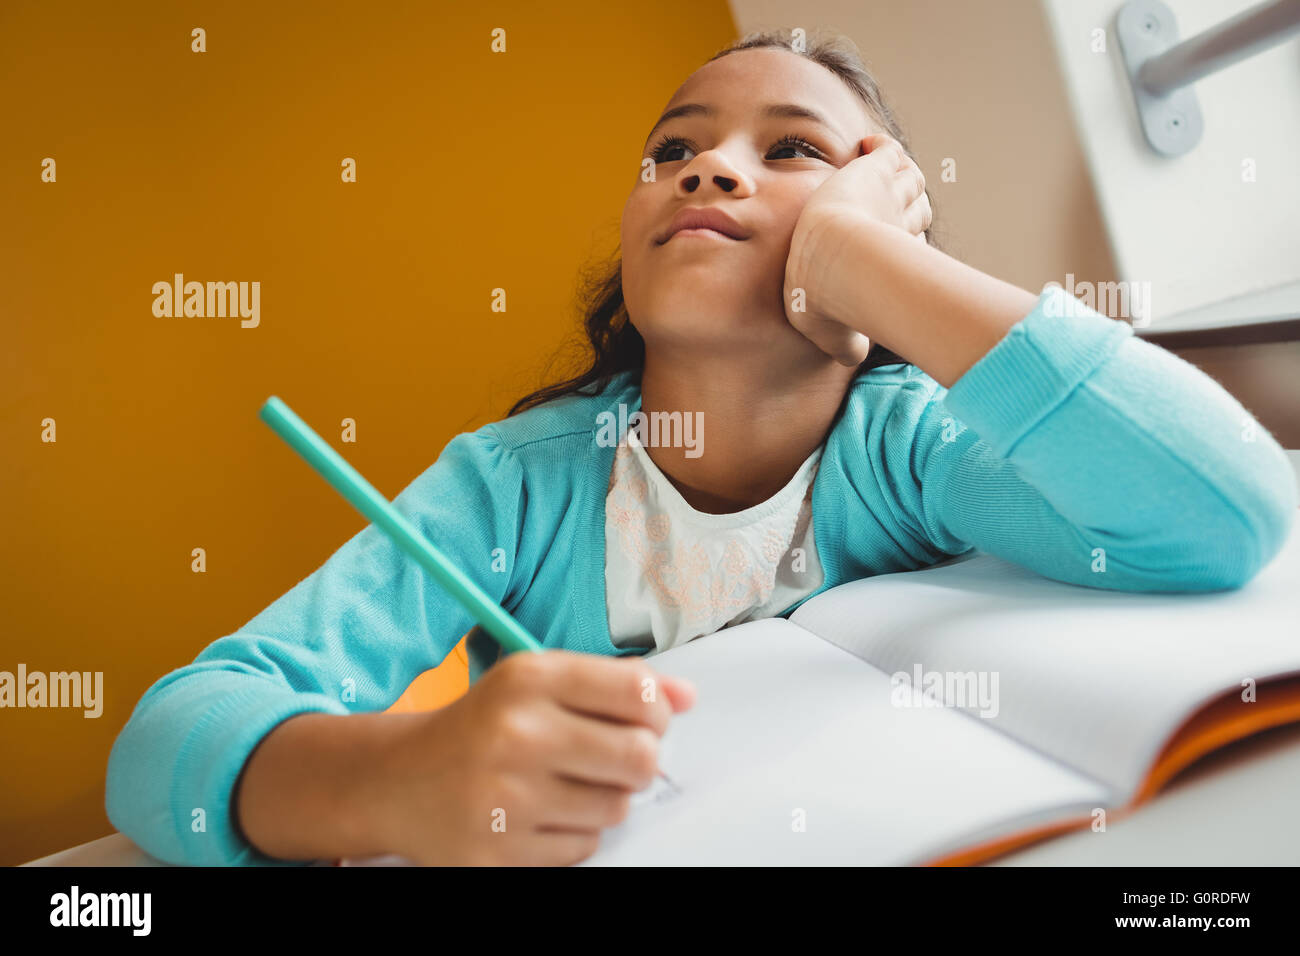 Girl writing in her notebook Stock Photo